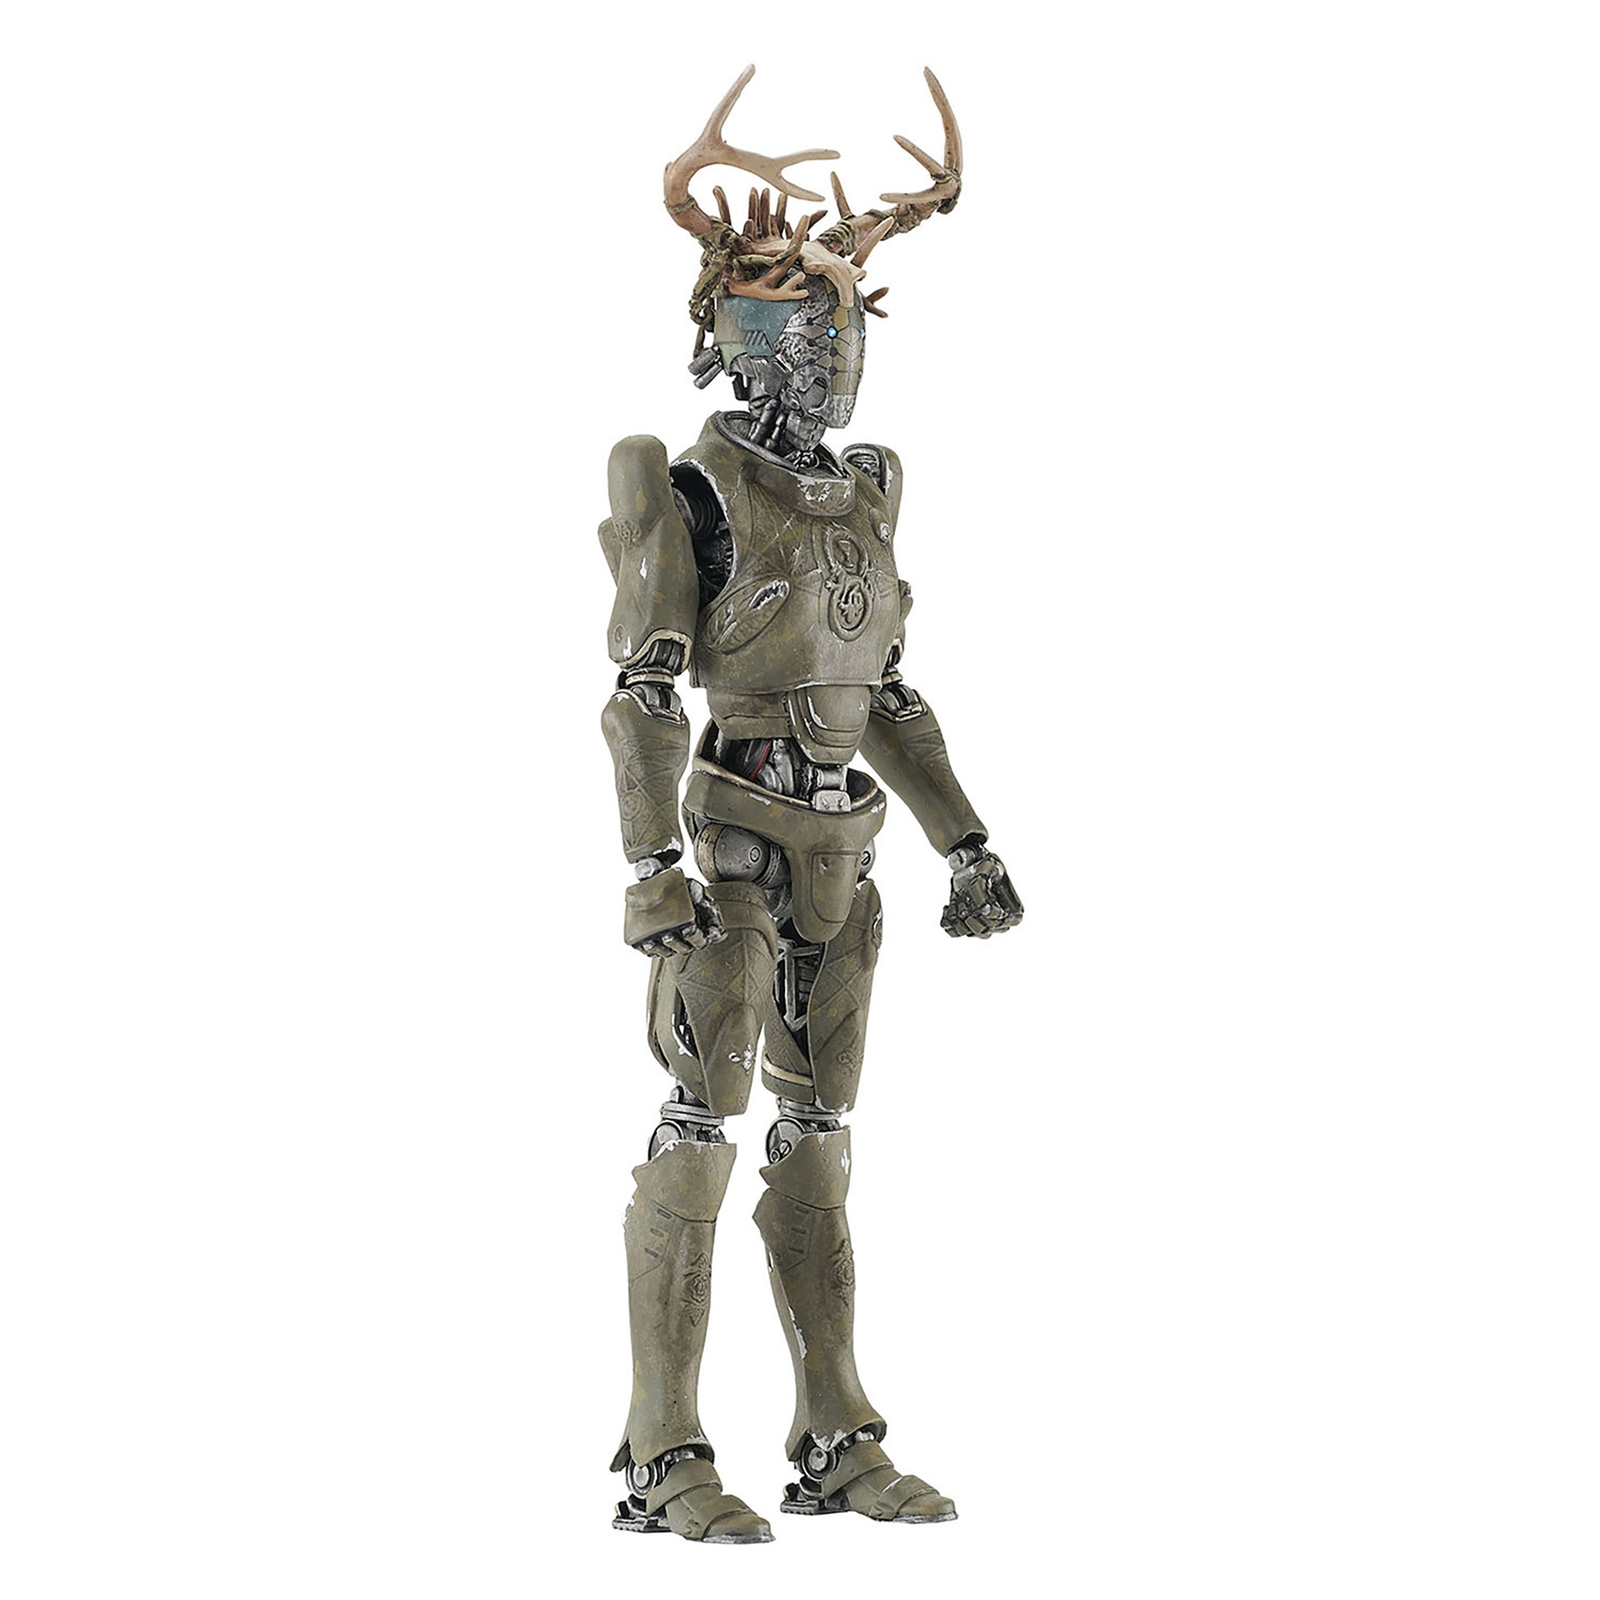 Diamond Select Rebel Moon Series 2 Jimmy with Horns Action Figure - 9